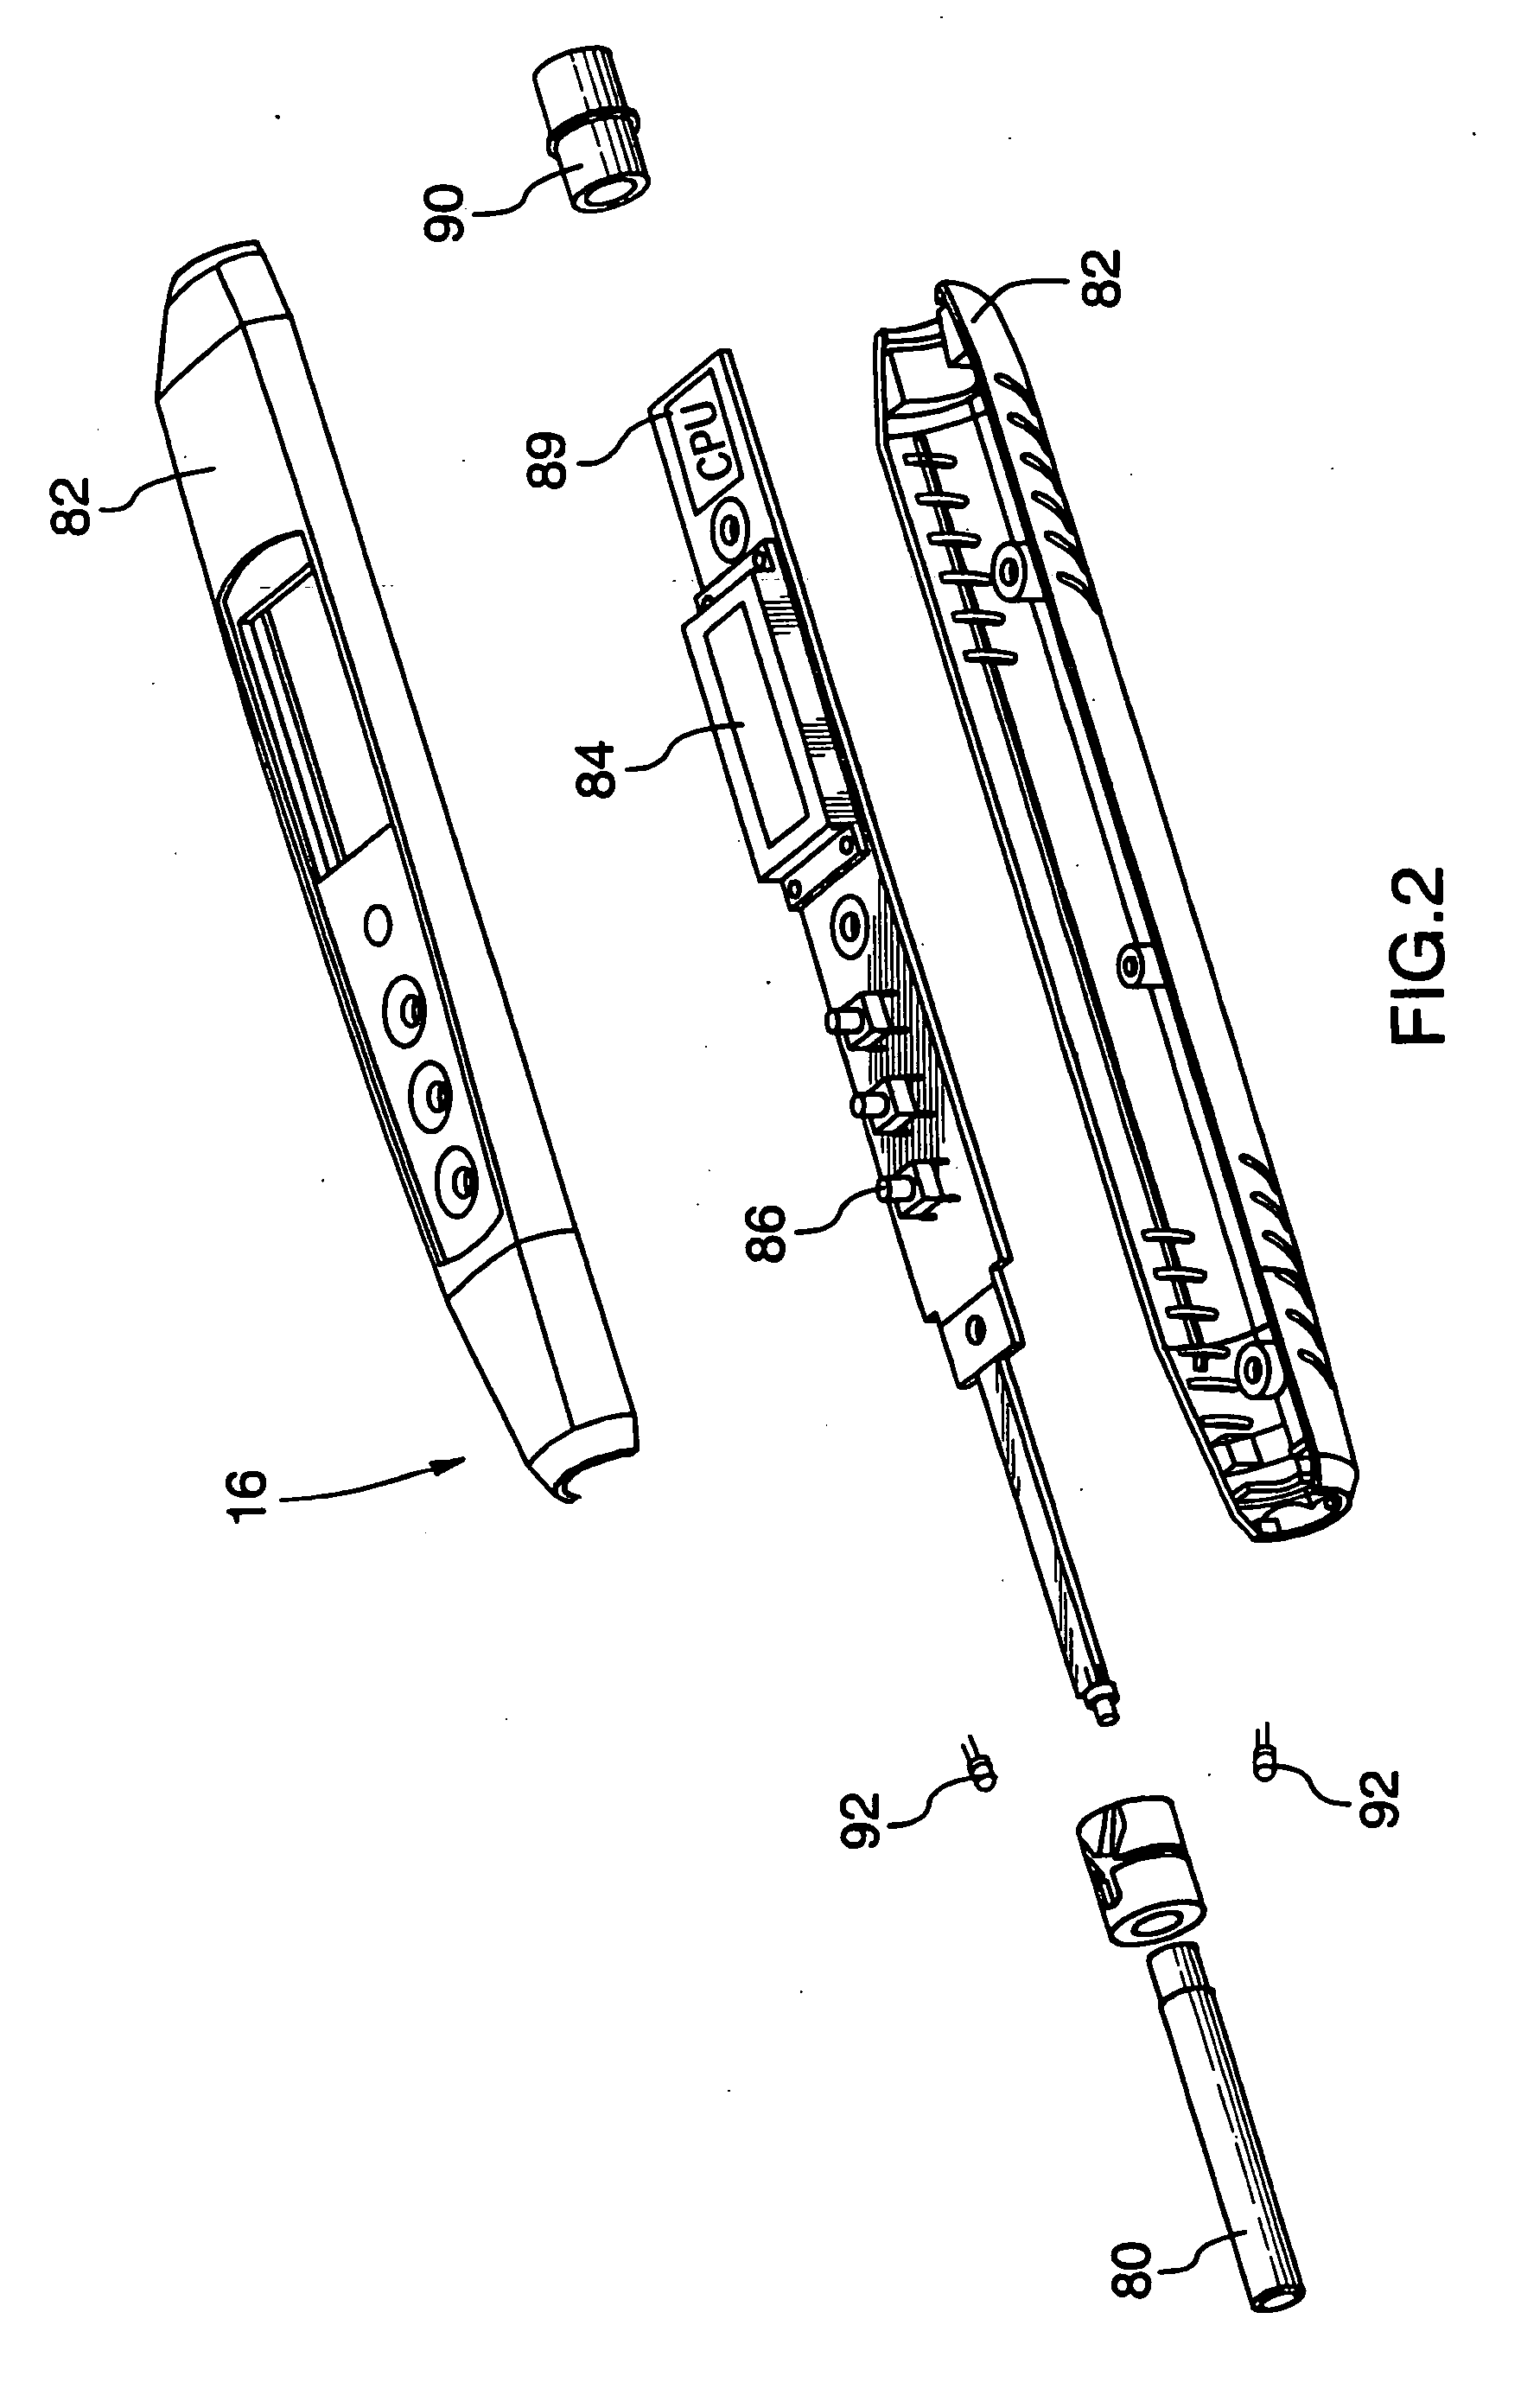 Method, apparatus and protocols for performing low level laser therapy